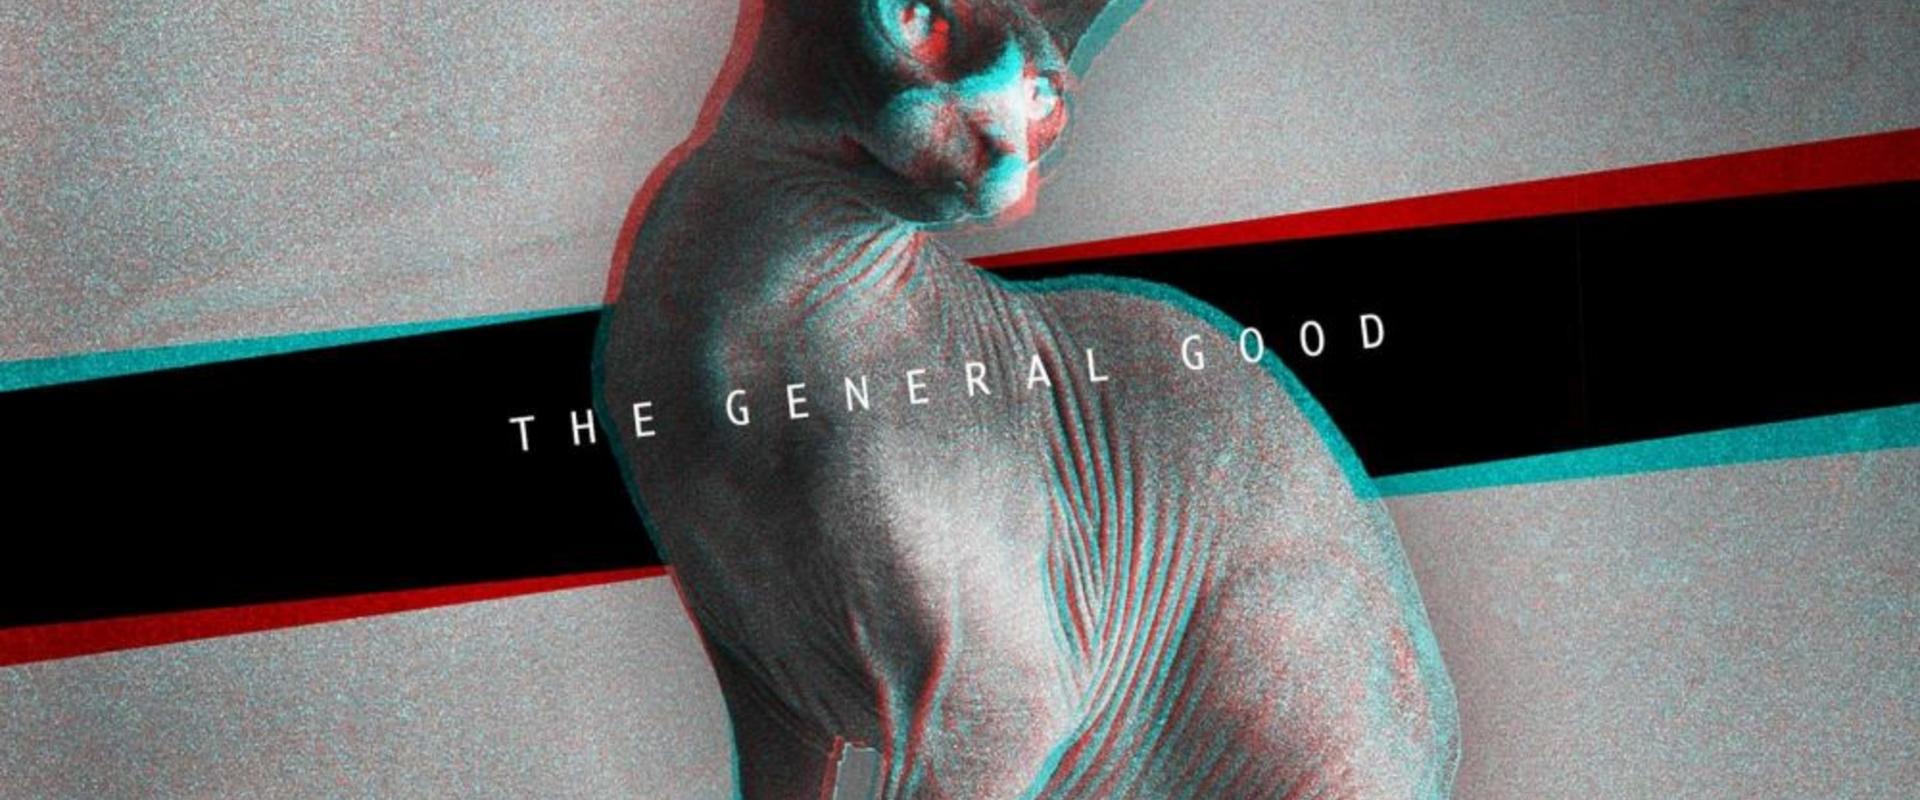 The General Good - The General Good